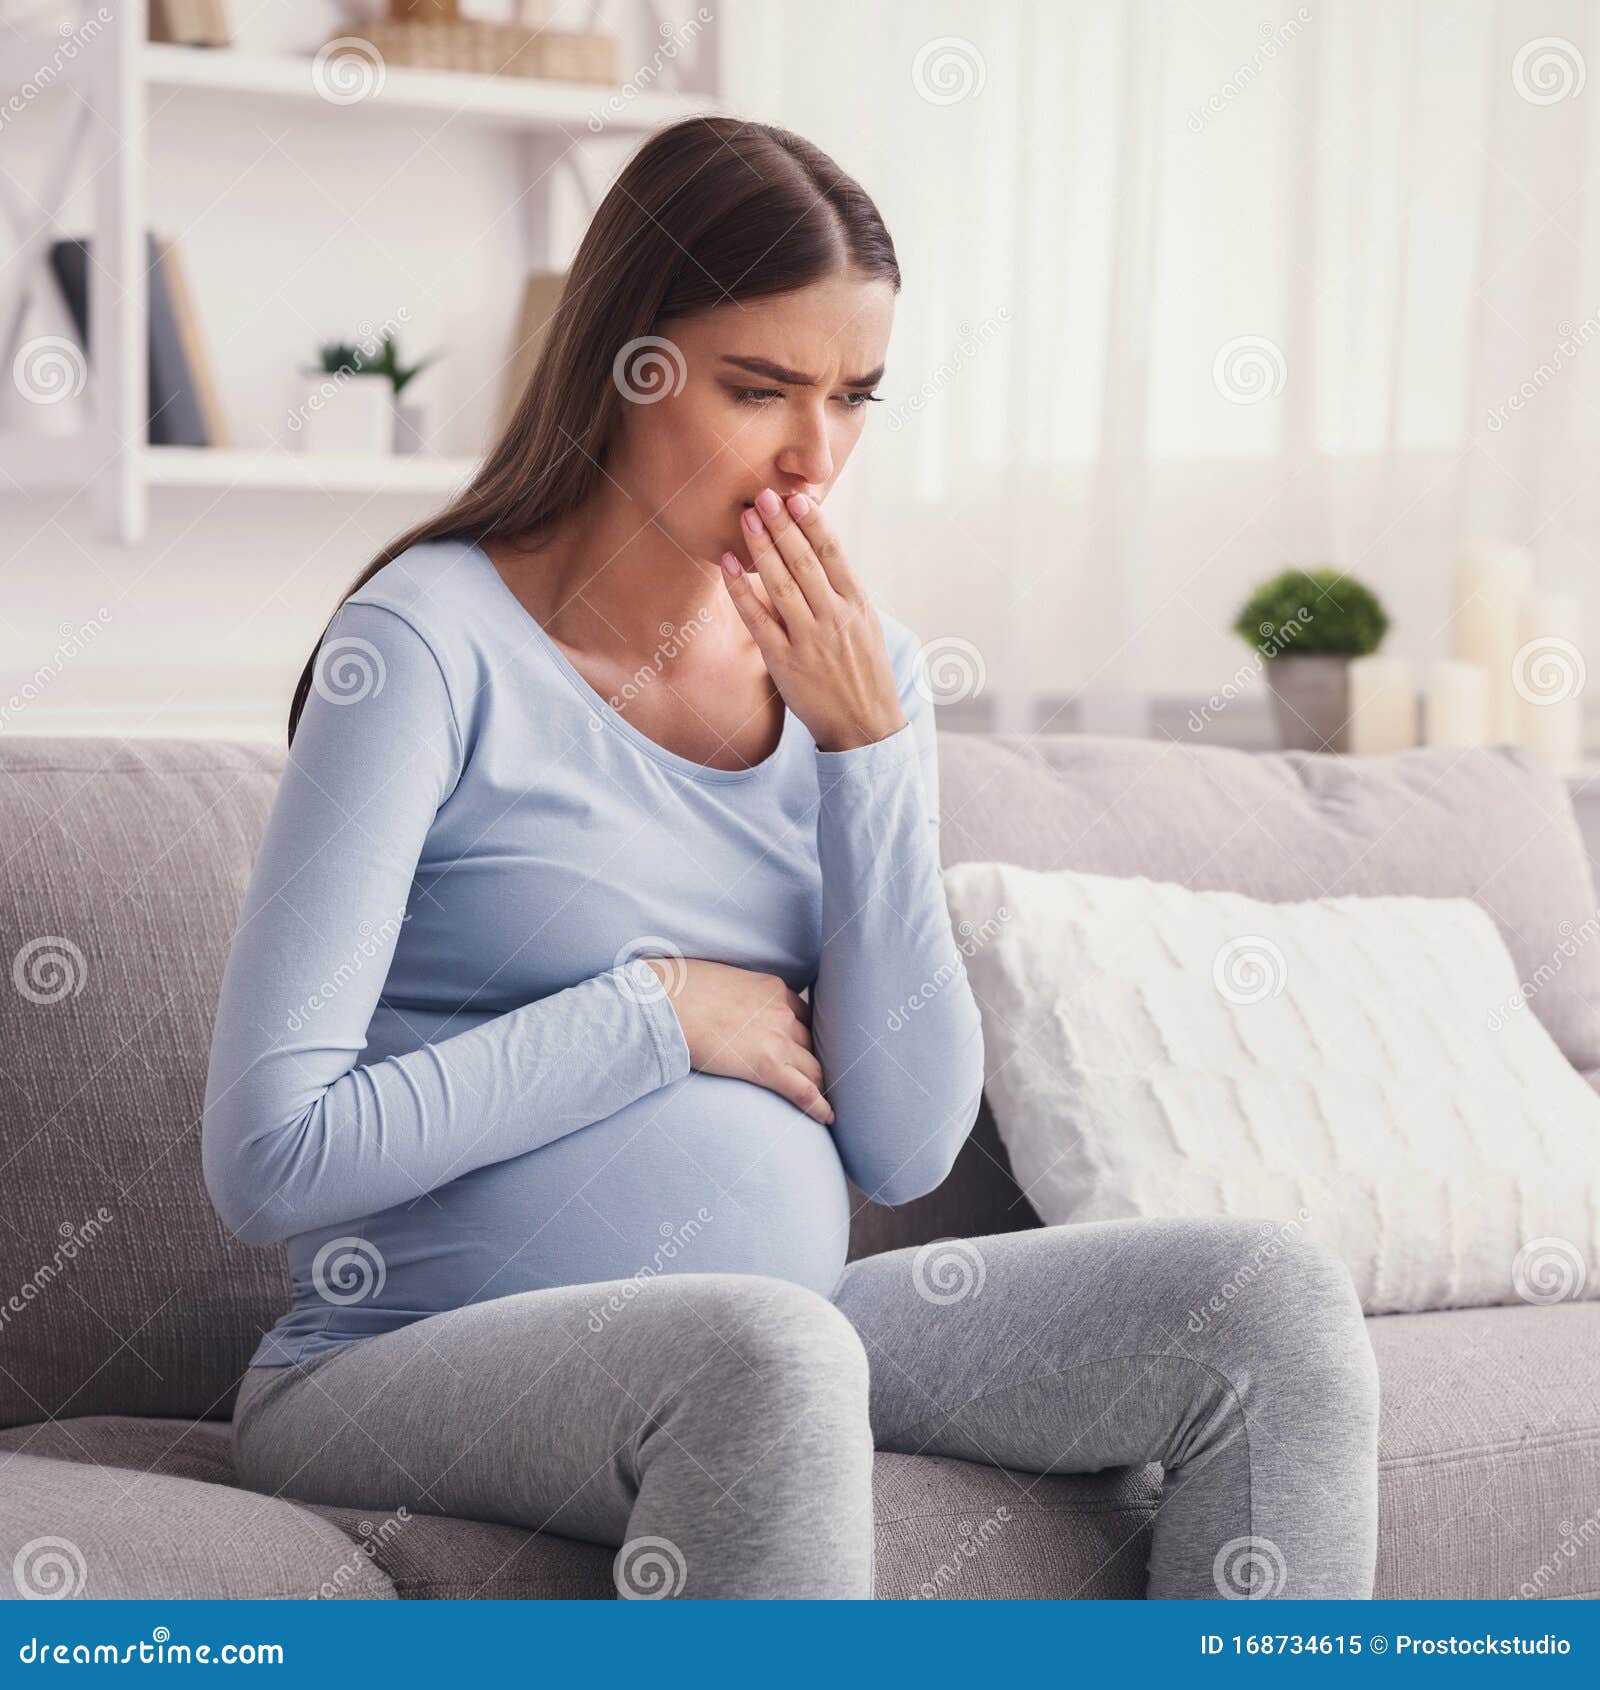 Pregnant Woman Having Pregnancy Morning Sickness Sitting On Couch Stock